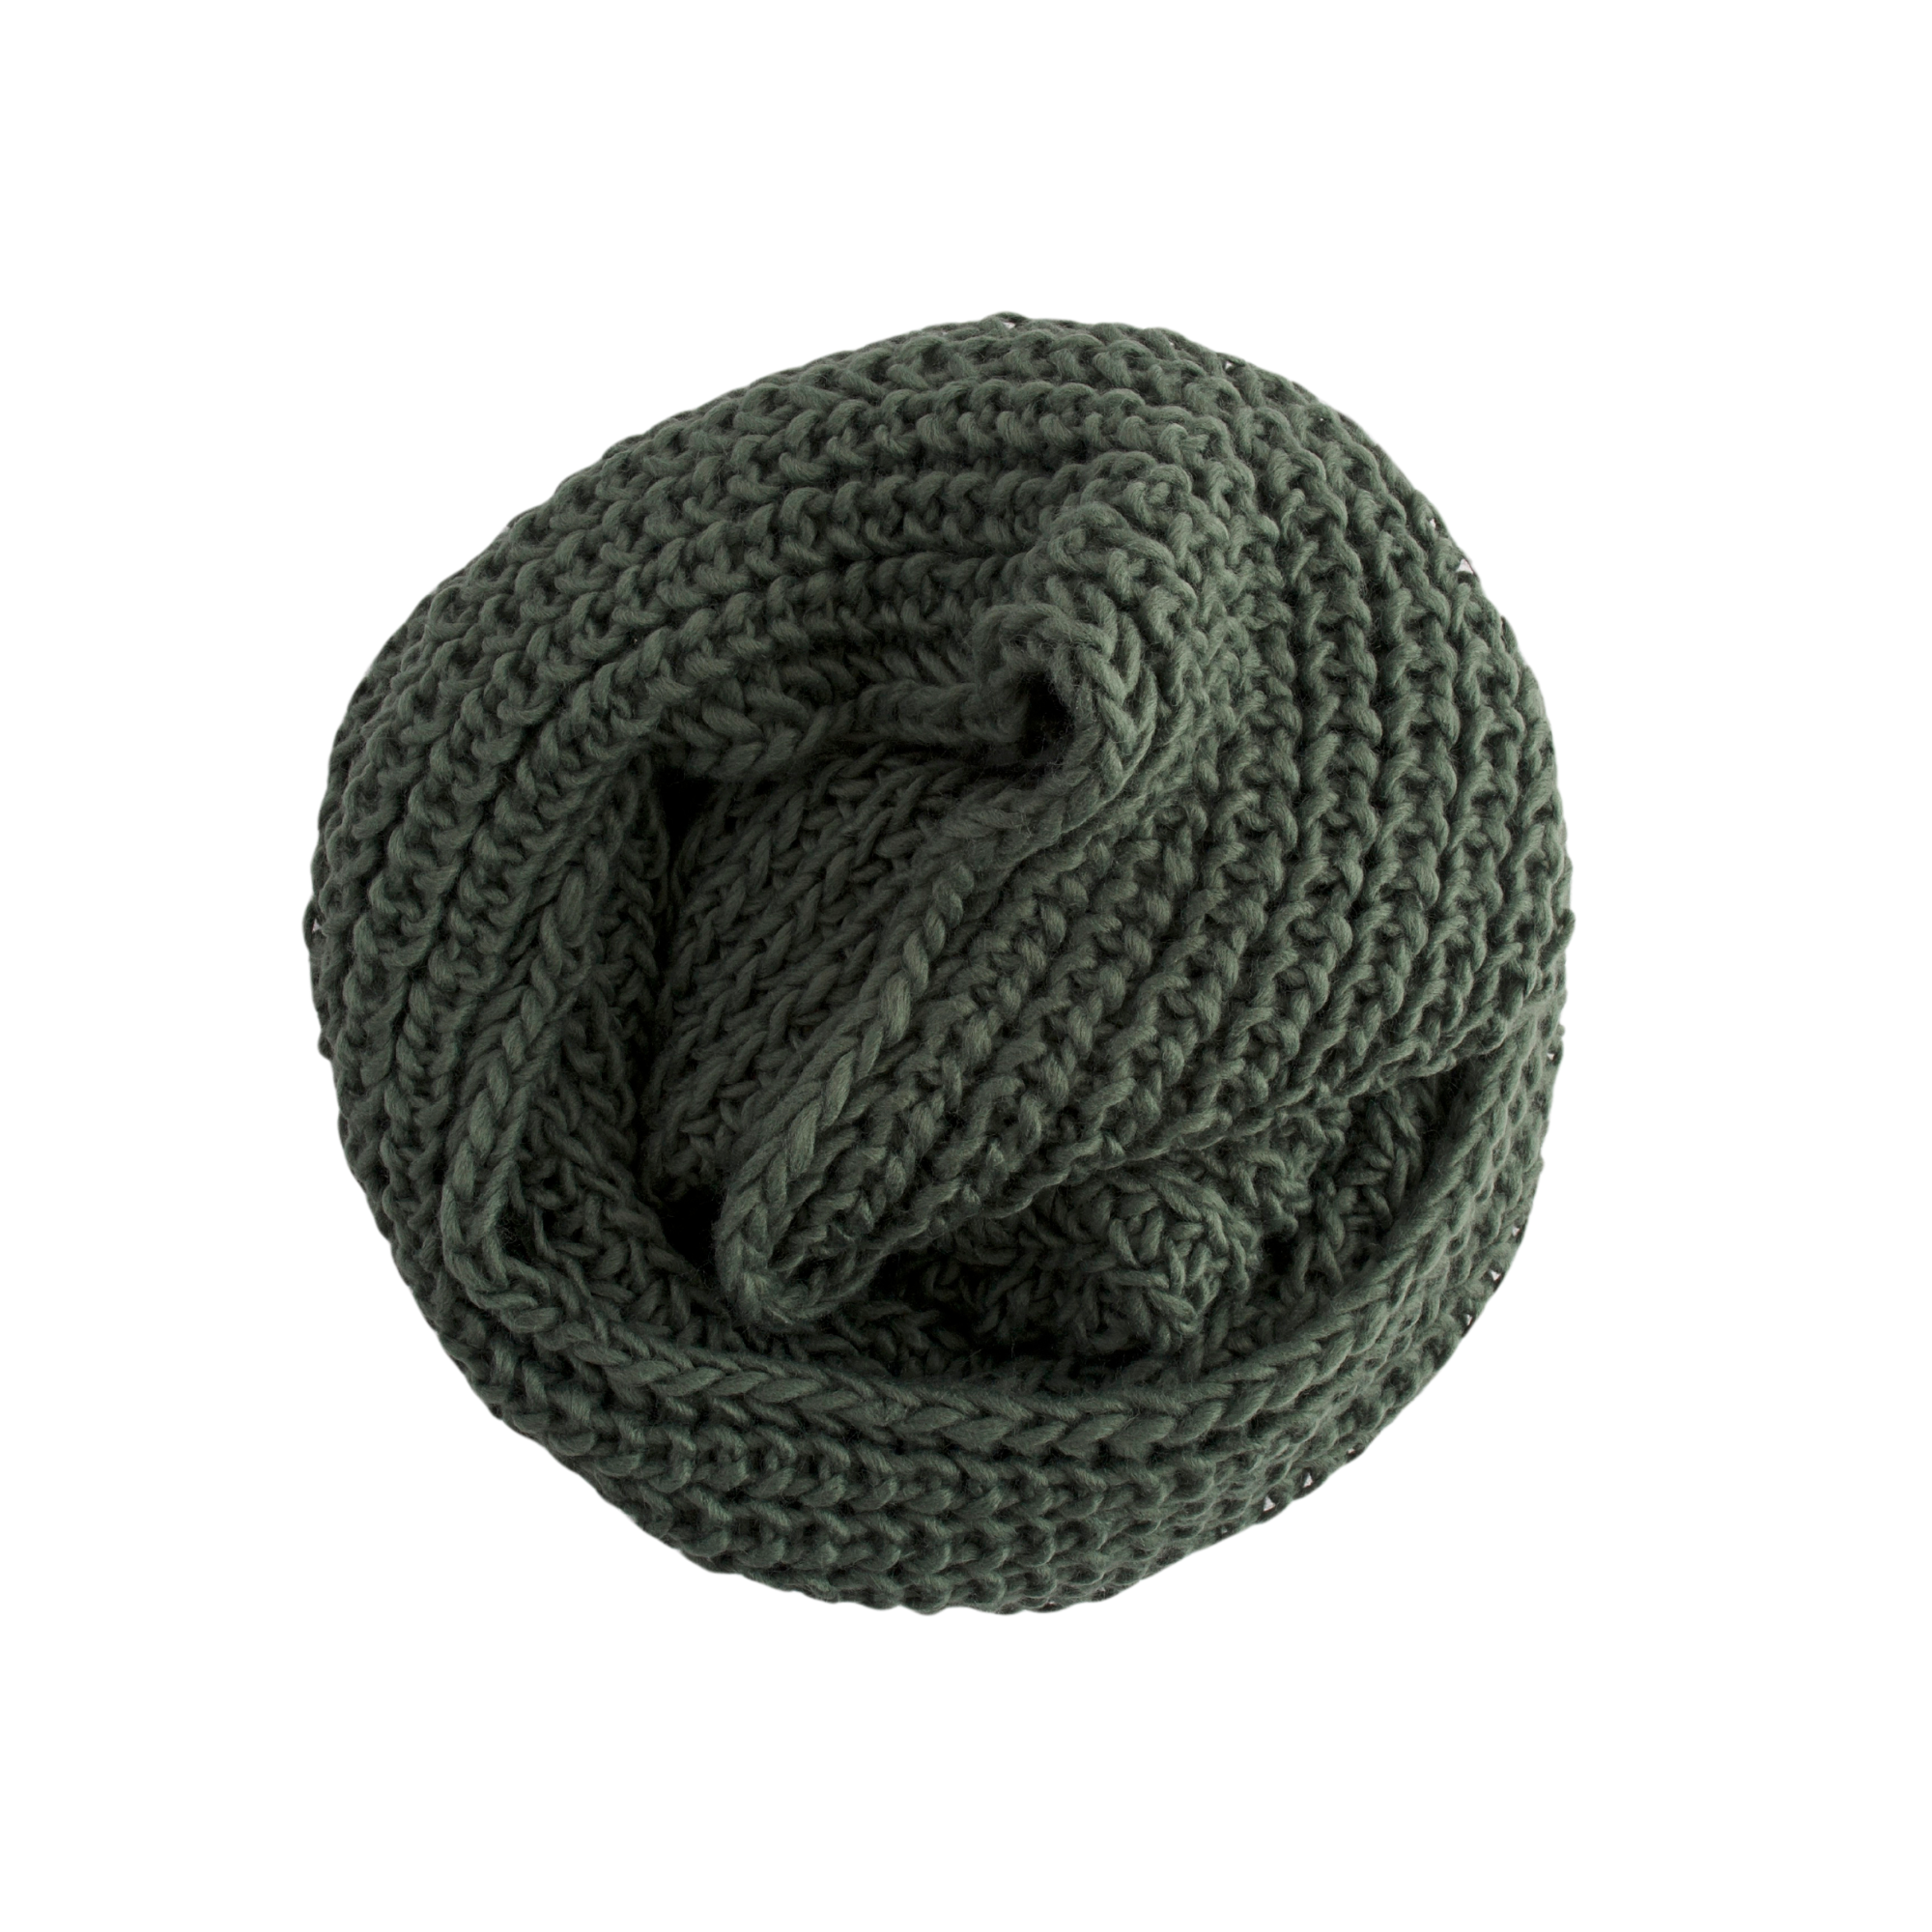 Snood - FOREST GREEN